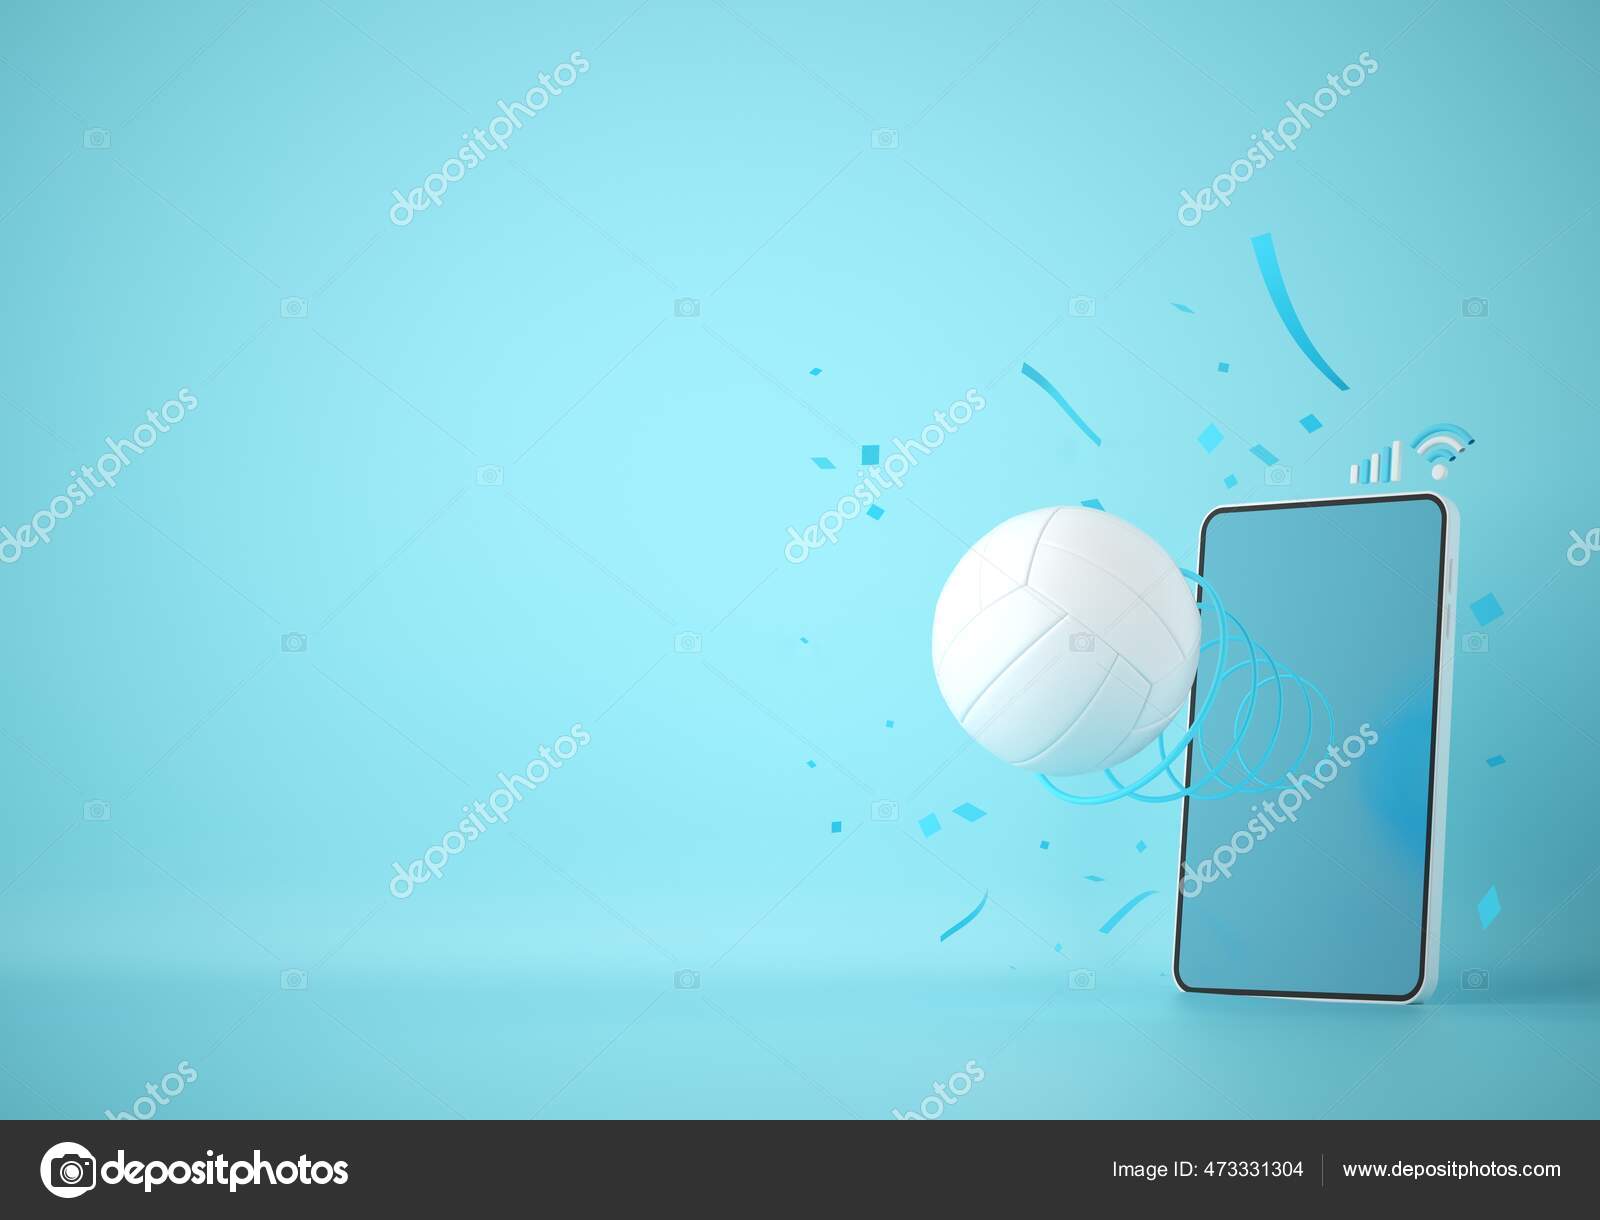 Volleyball Ball Object Smartphone Sport Application Online Volleyball Training Program Stock Photo by ©planktoncg@gmail 473331304